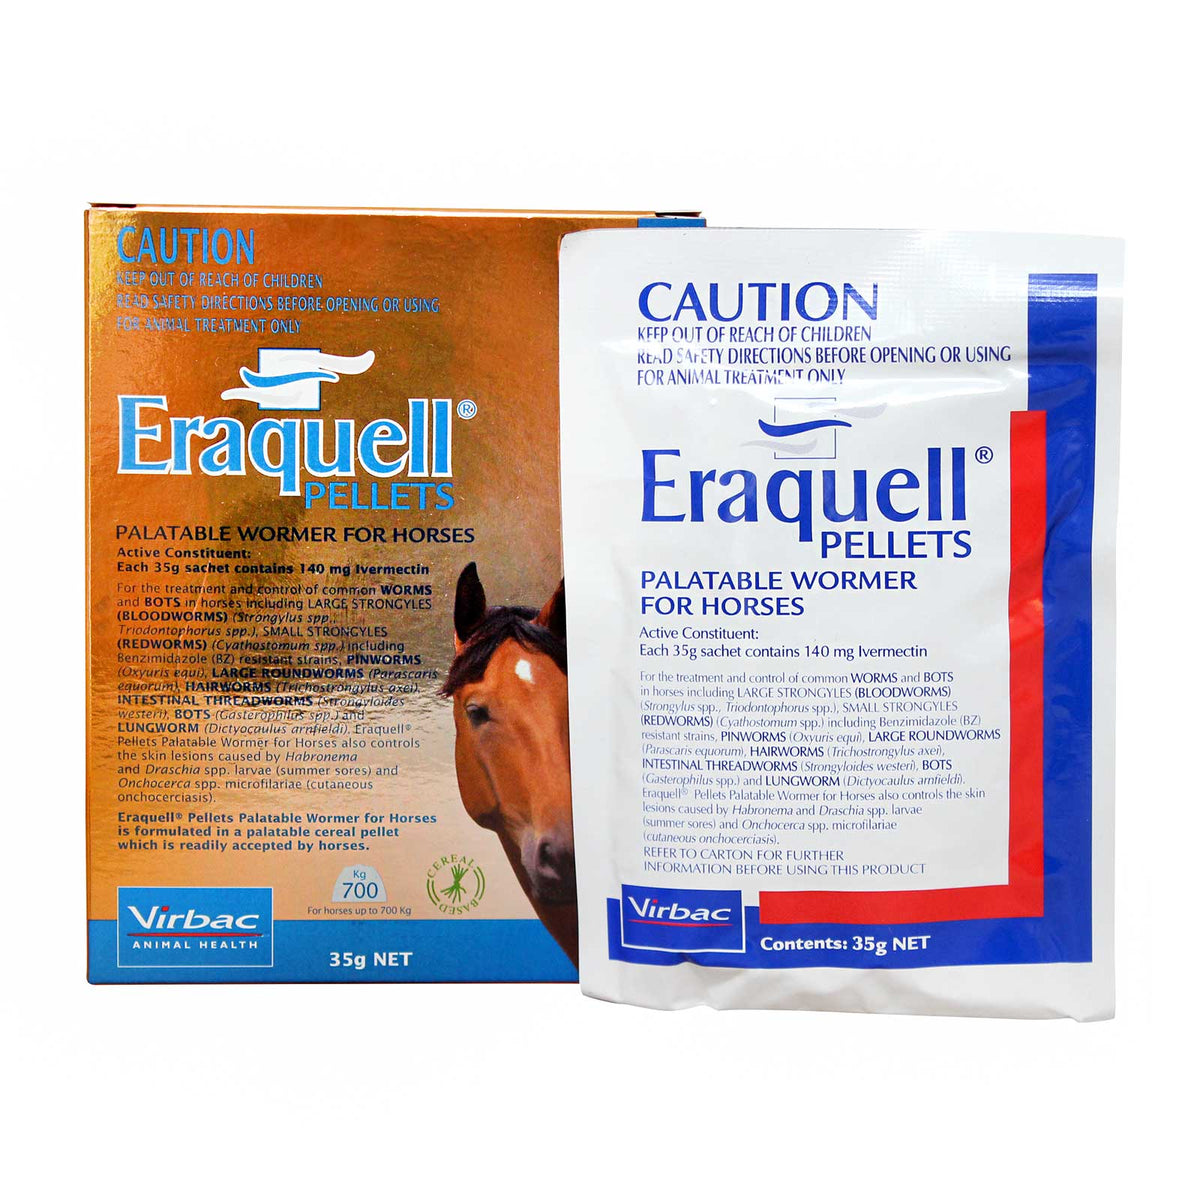 Eraquell Pellets Palatable Wormer for Horses 35g